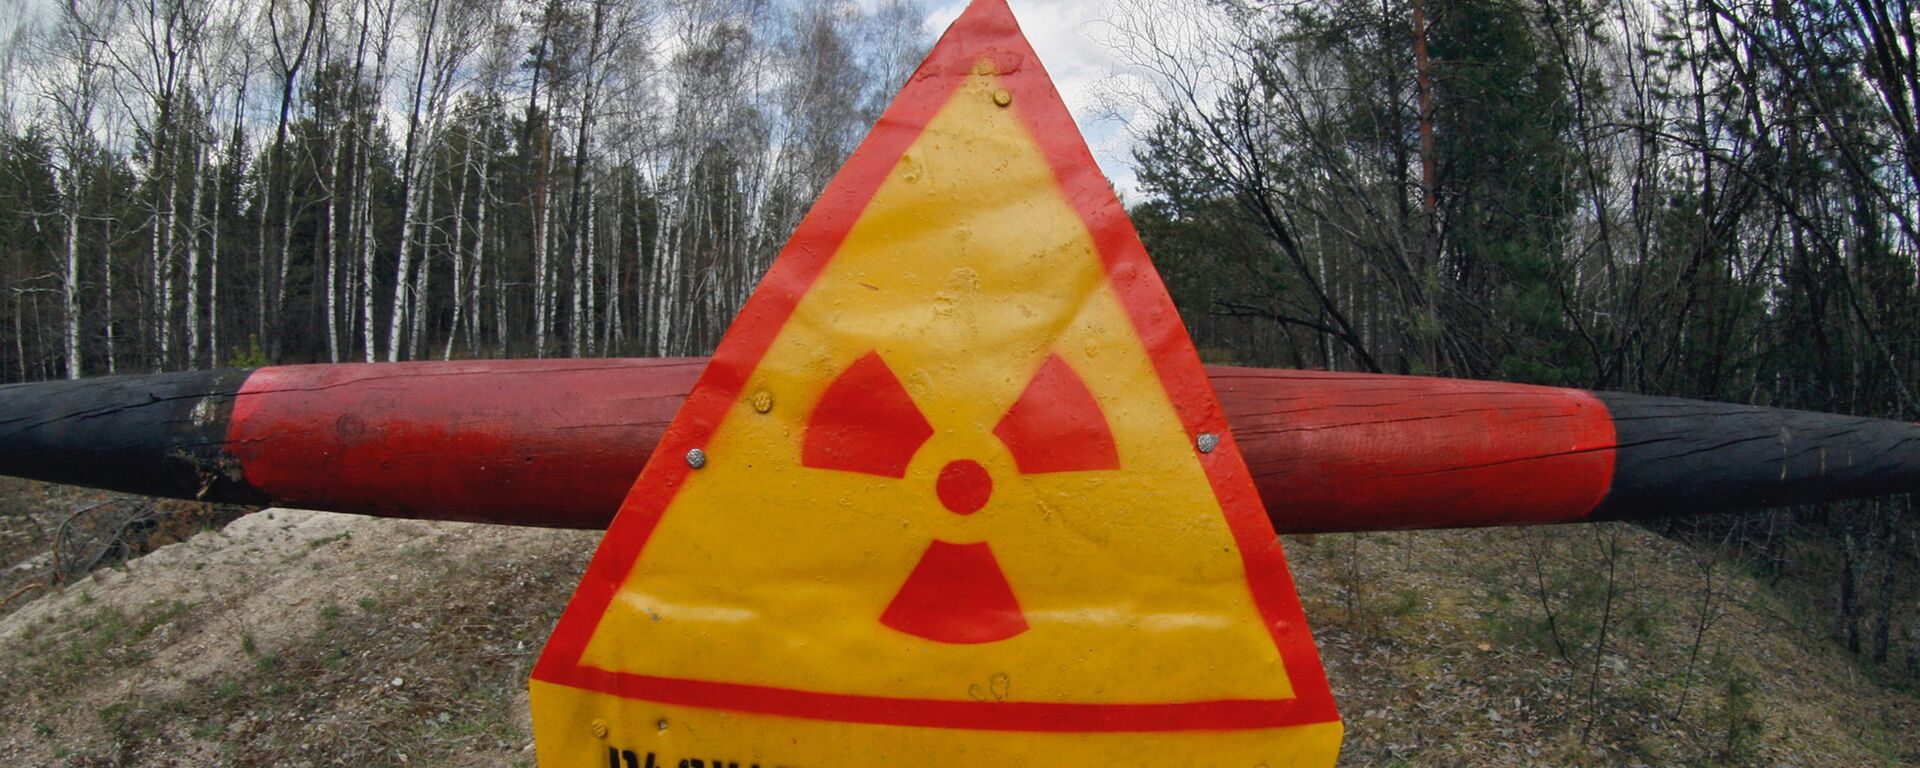 A danger sign in the Khoiniki District, Belarus, within a 30 kilometer restricted zone round the Chernobyl nuclear plant. File photo - Sputnik International, 1920, 07.01.2018